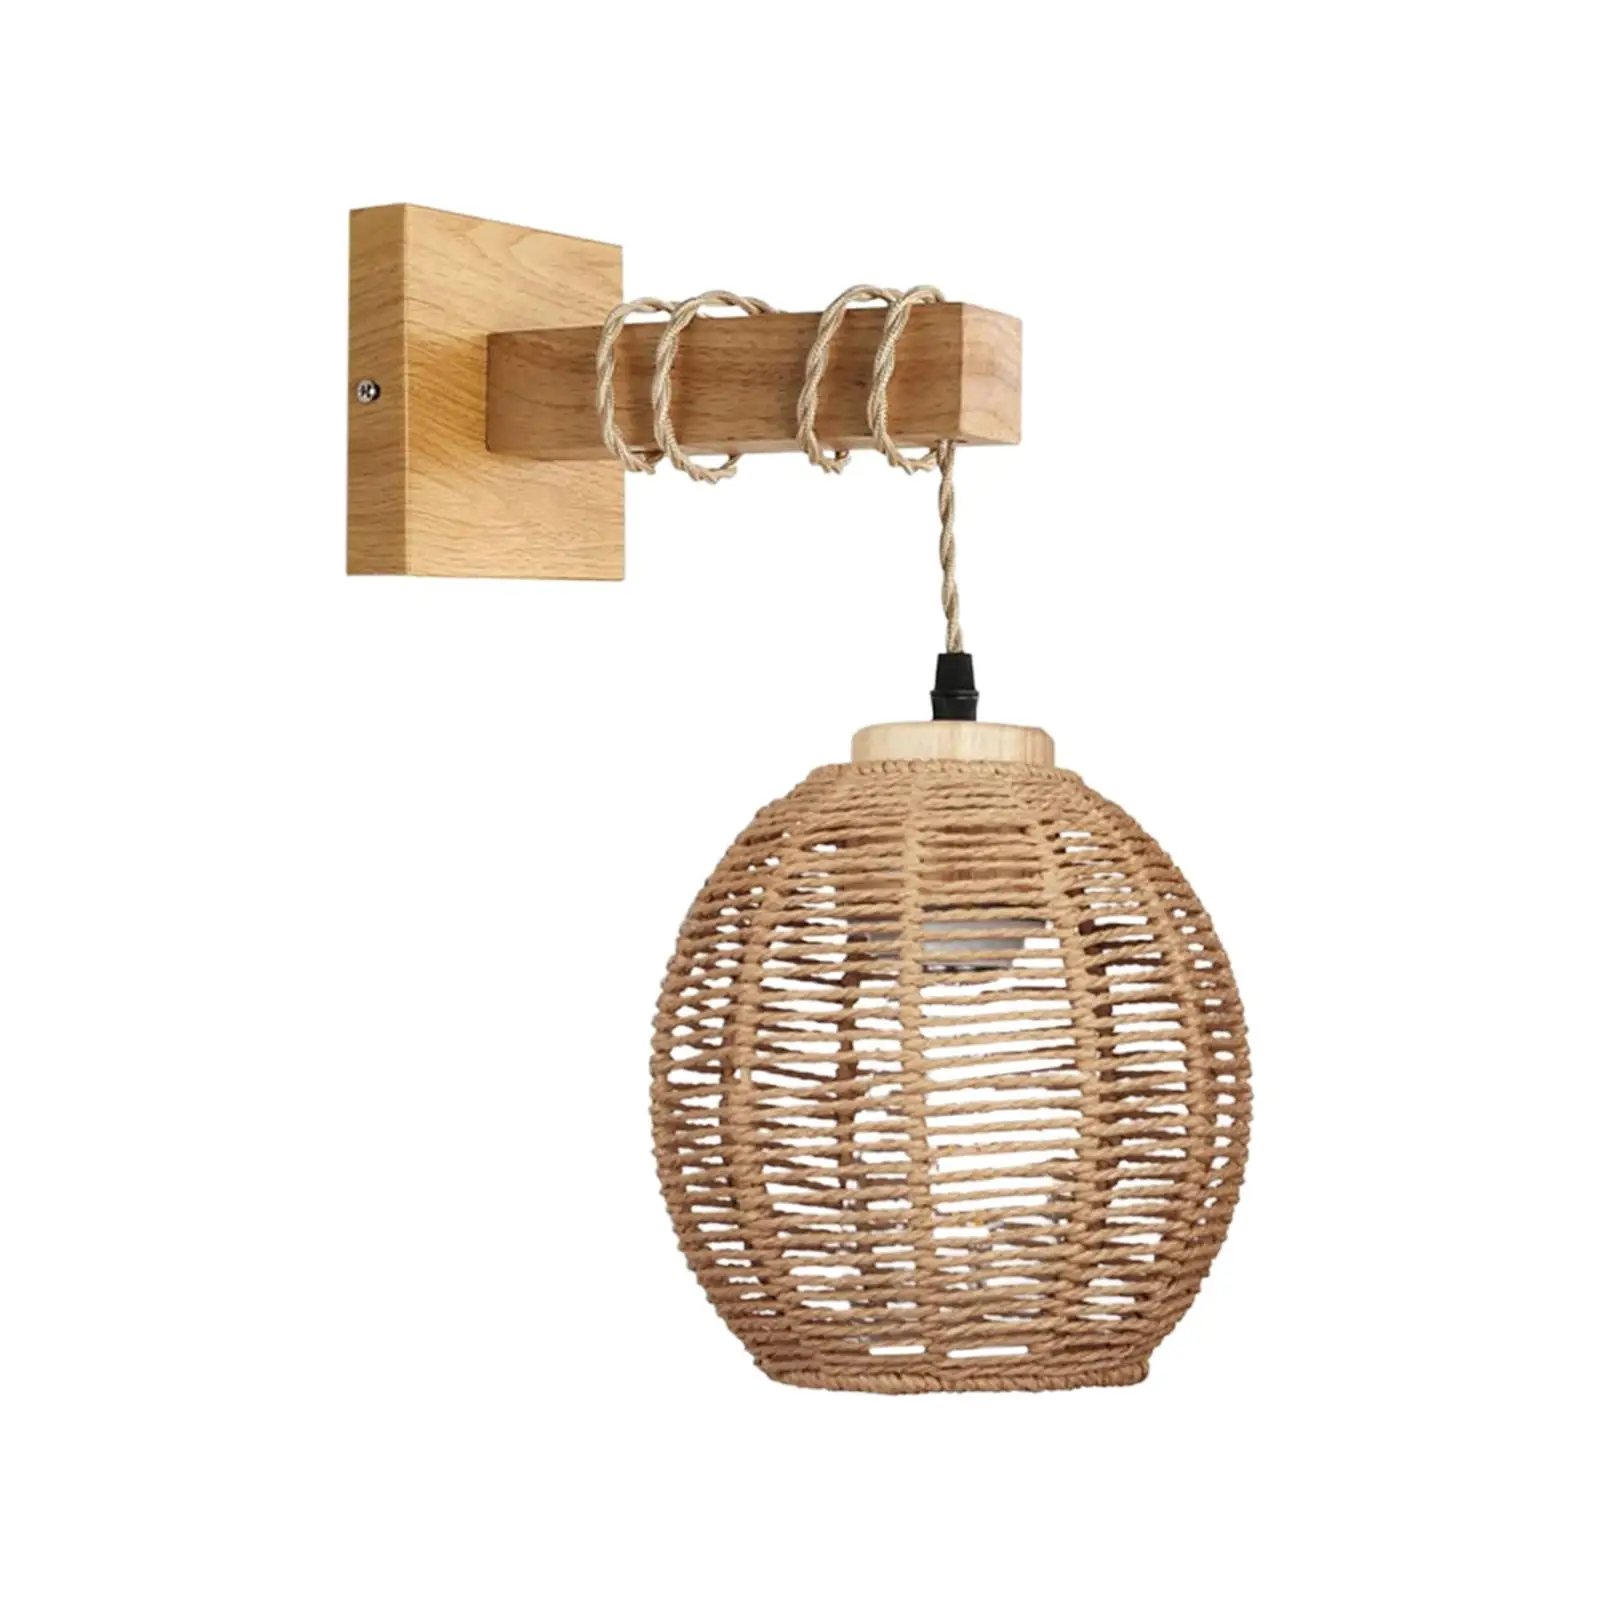 Rattan Wall Lamp Handwoven Lamp Shade Cover Dining Room Wall Lights Fixtures